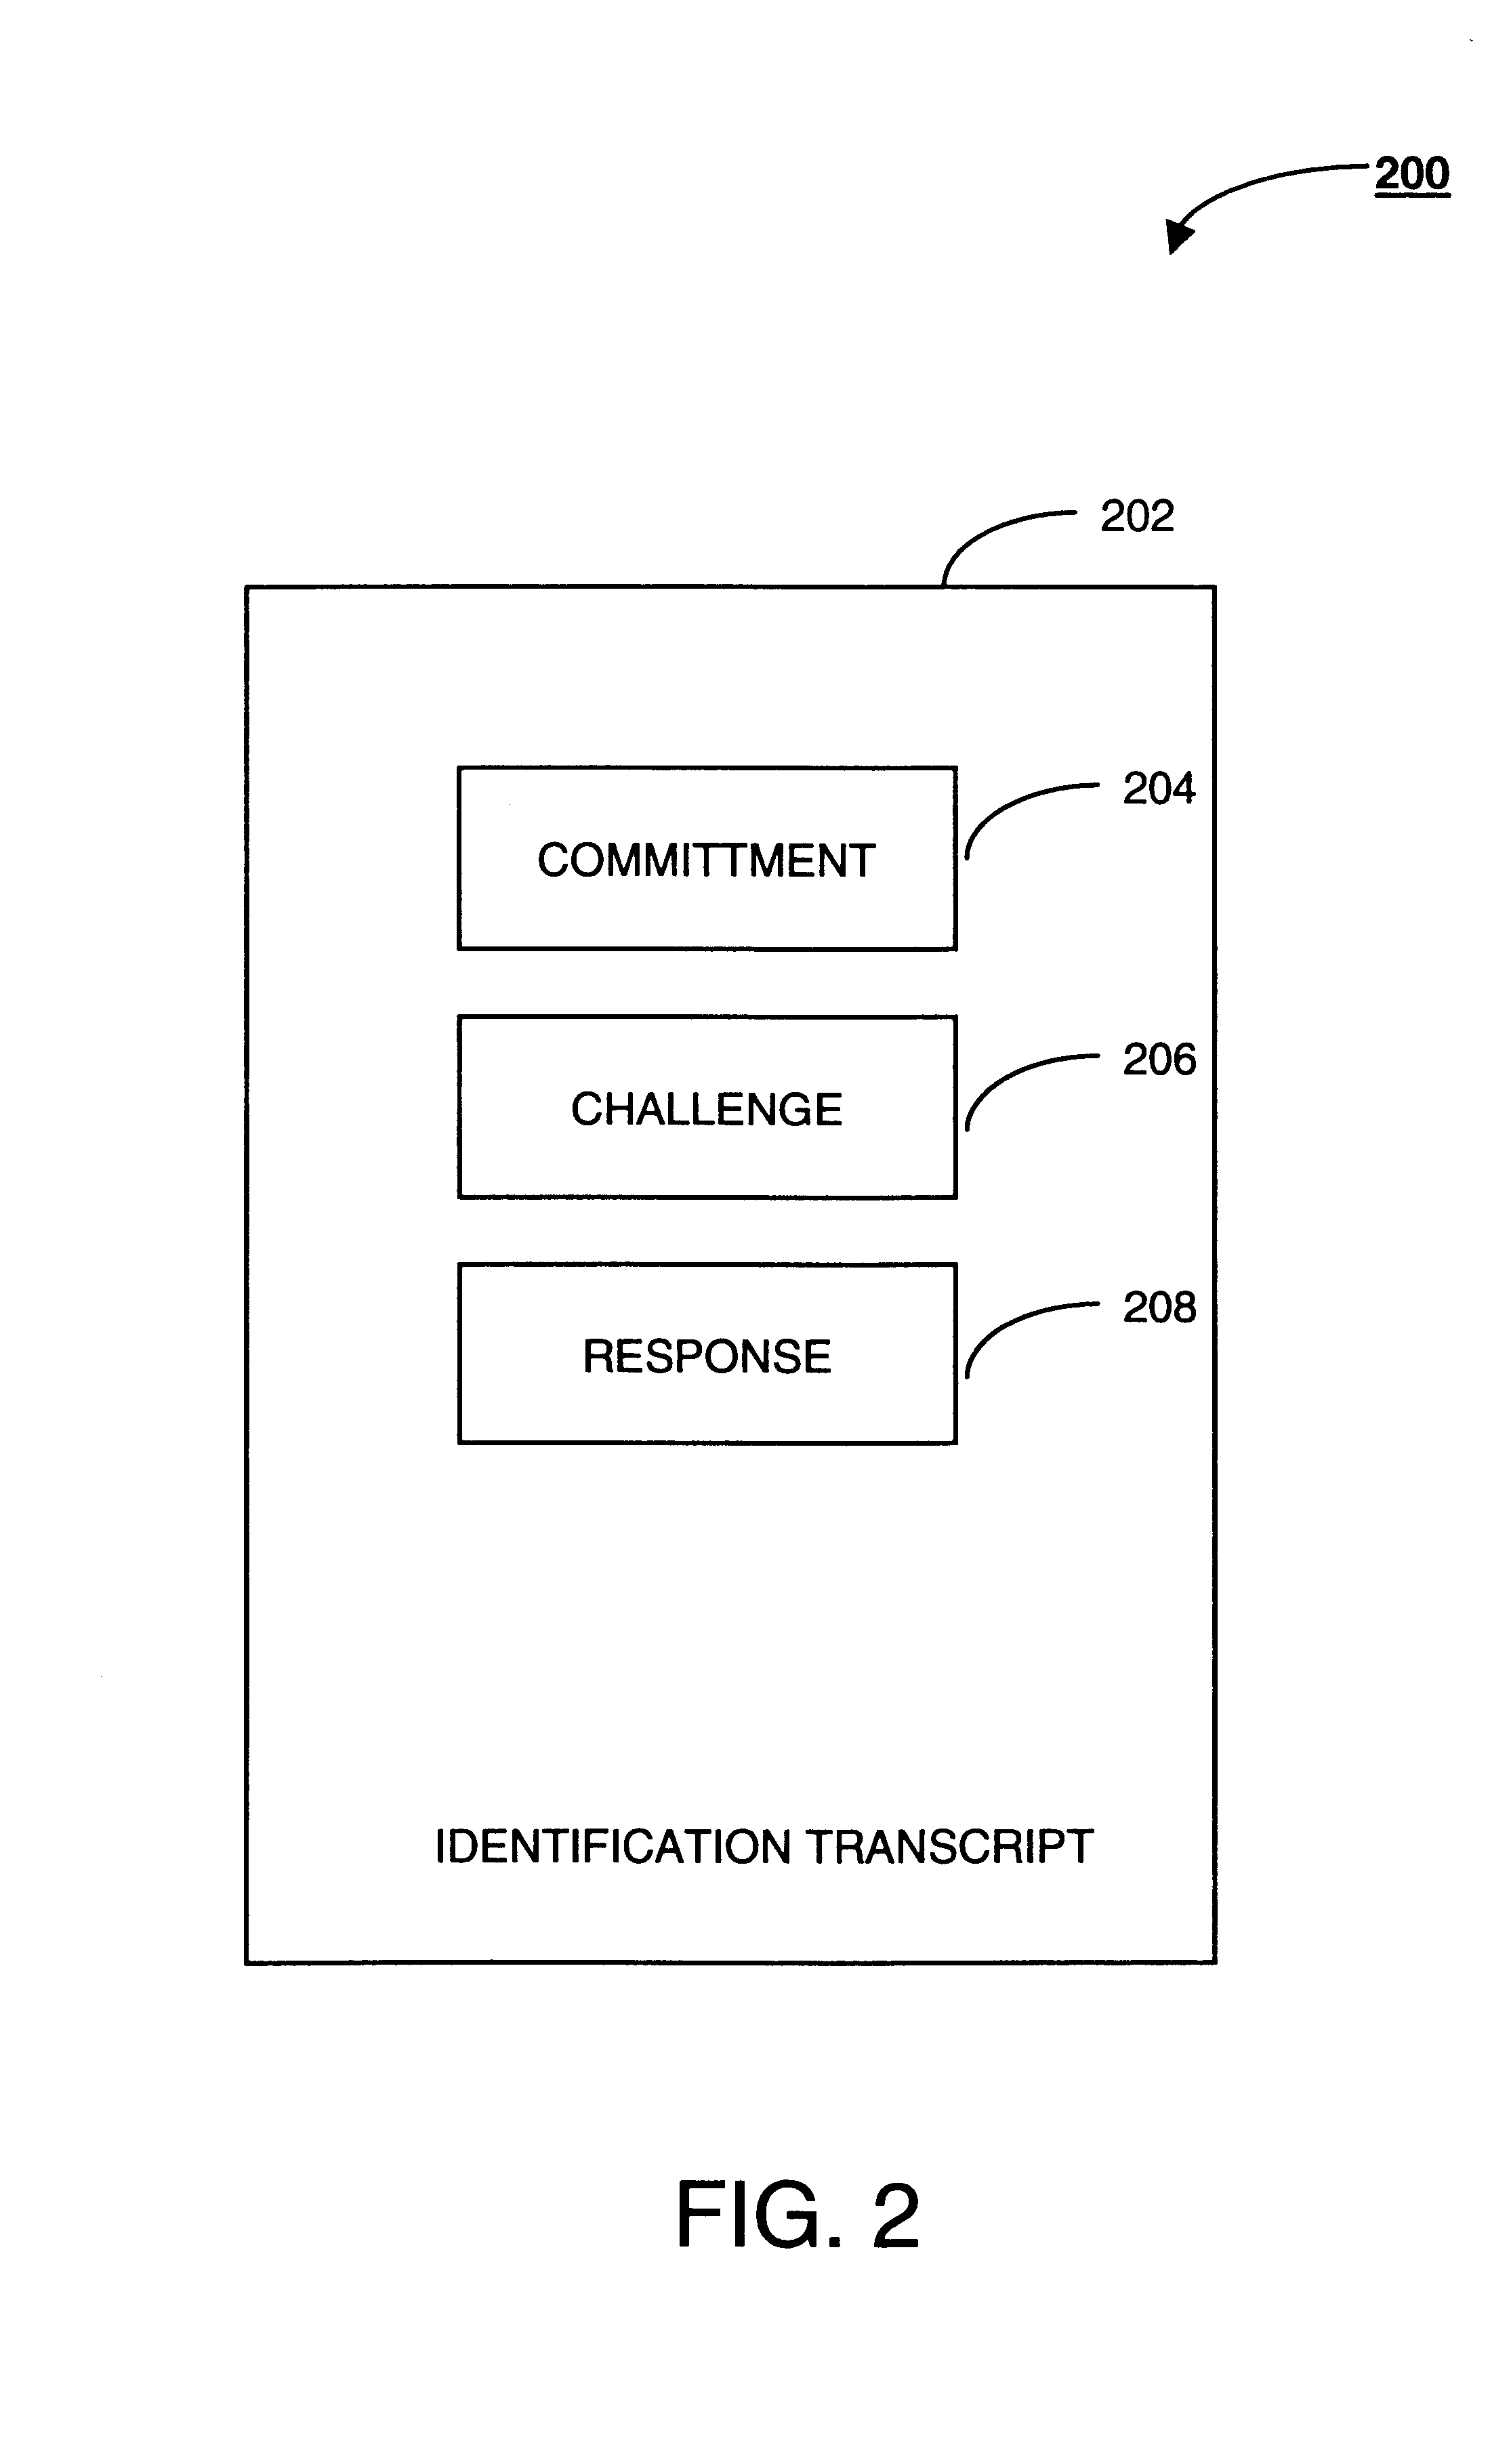 Method for enabling privacy and trust in electronic communities